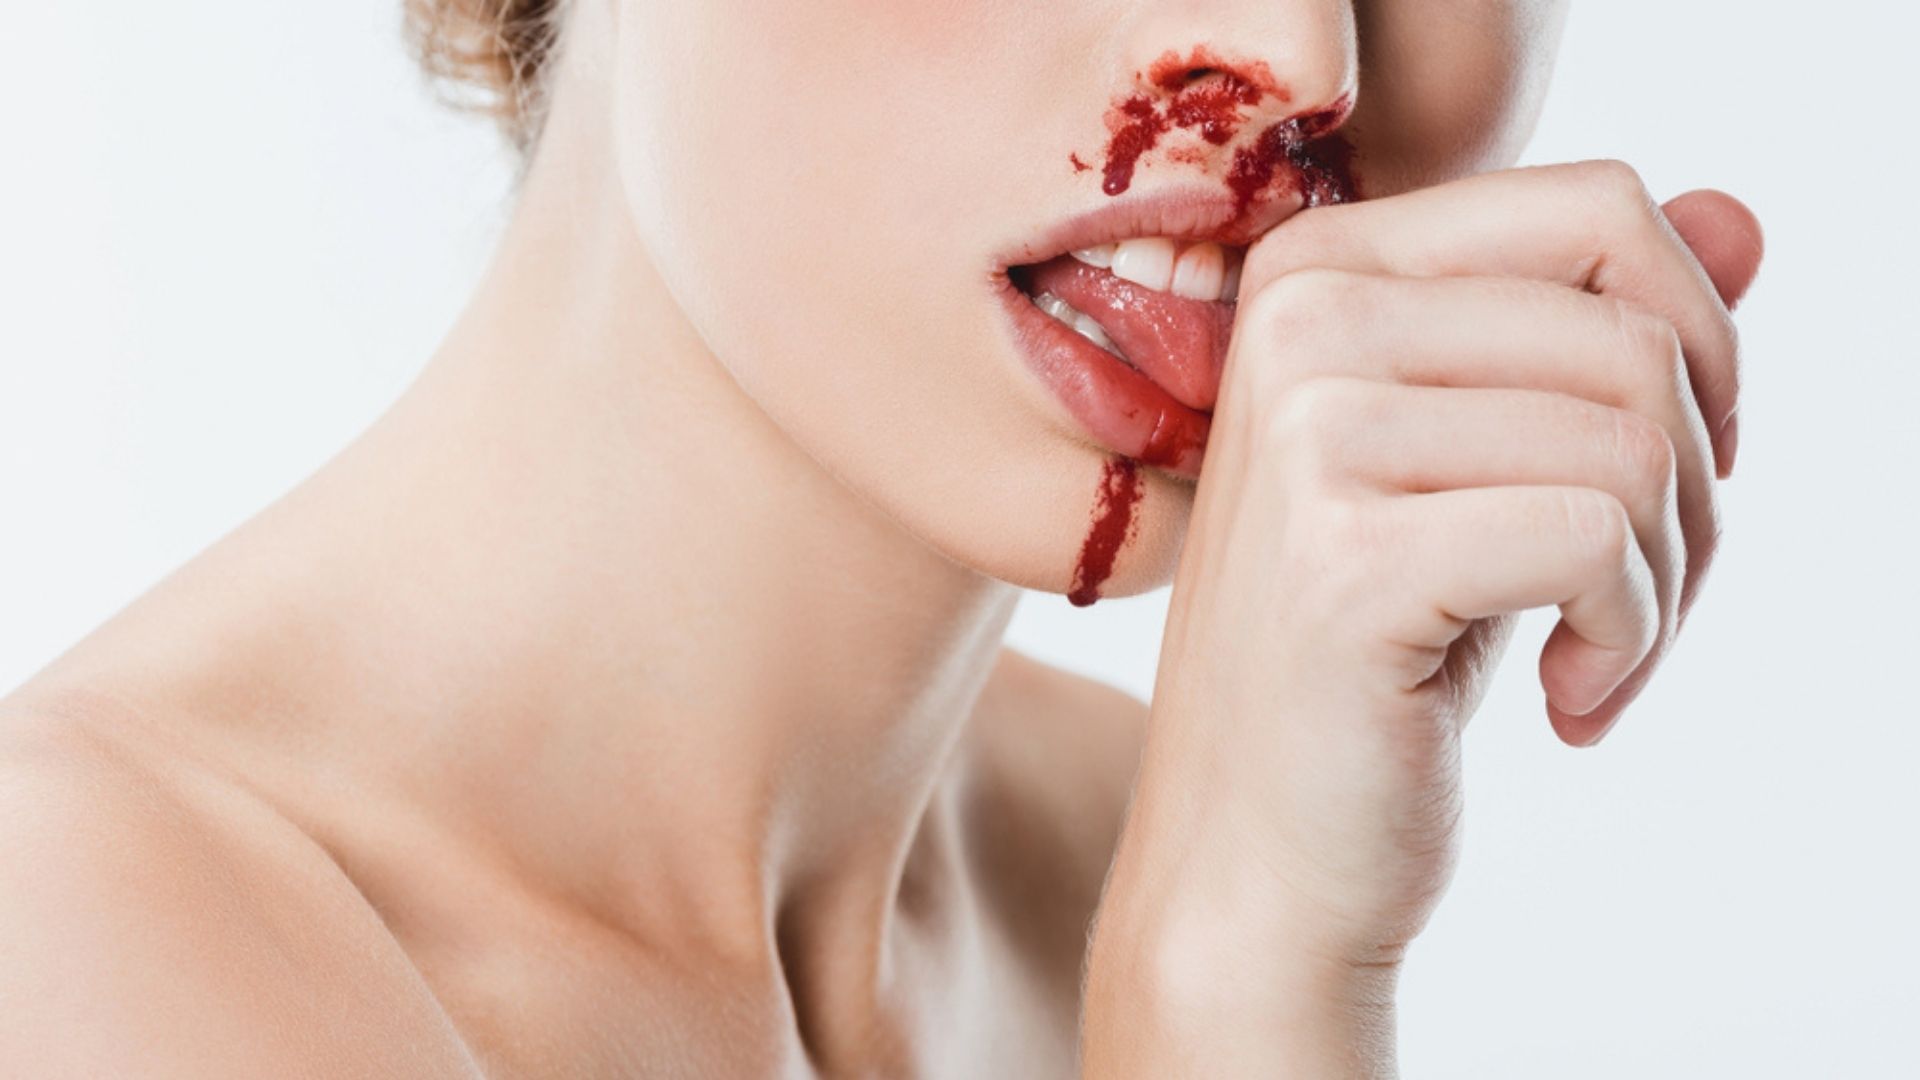 The Incredible Health Benefits of Licking Your Own Wounds